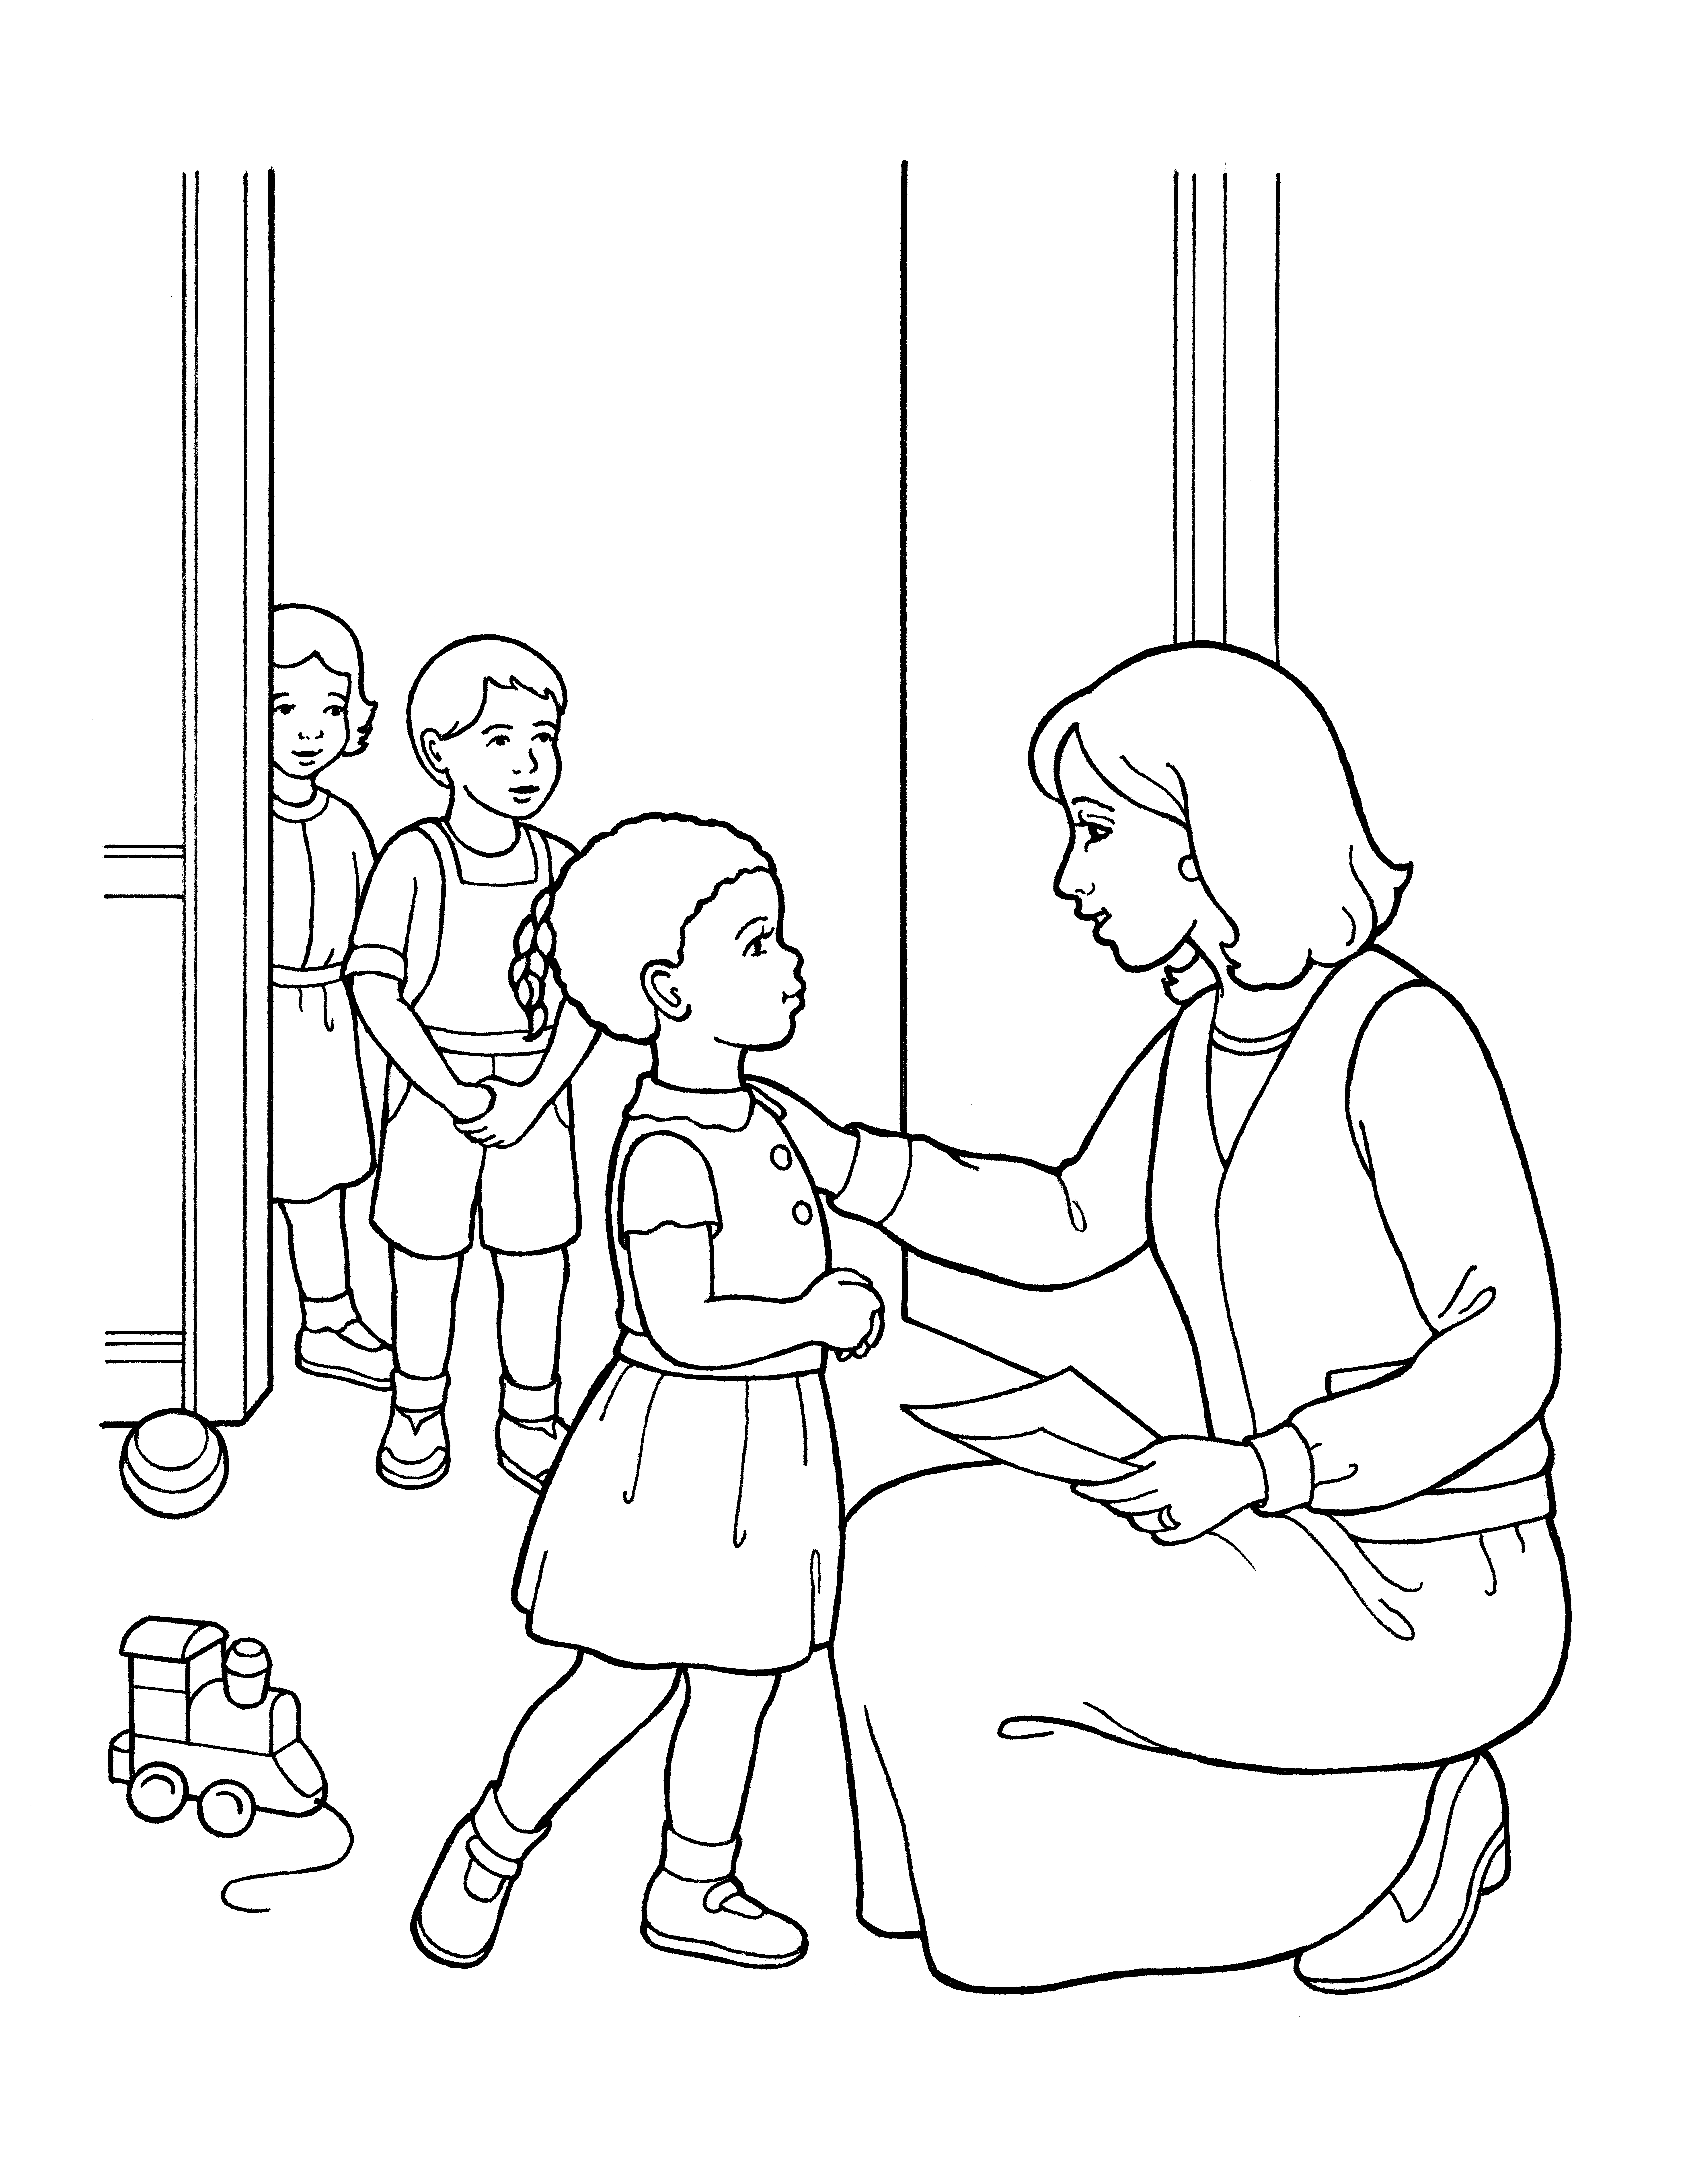 A black-and-white illustration of a nursery leader greeting a small girl with toys on the floor and two other children standing in the doorway.